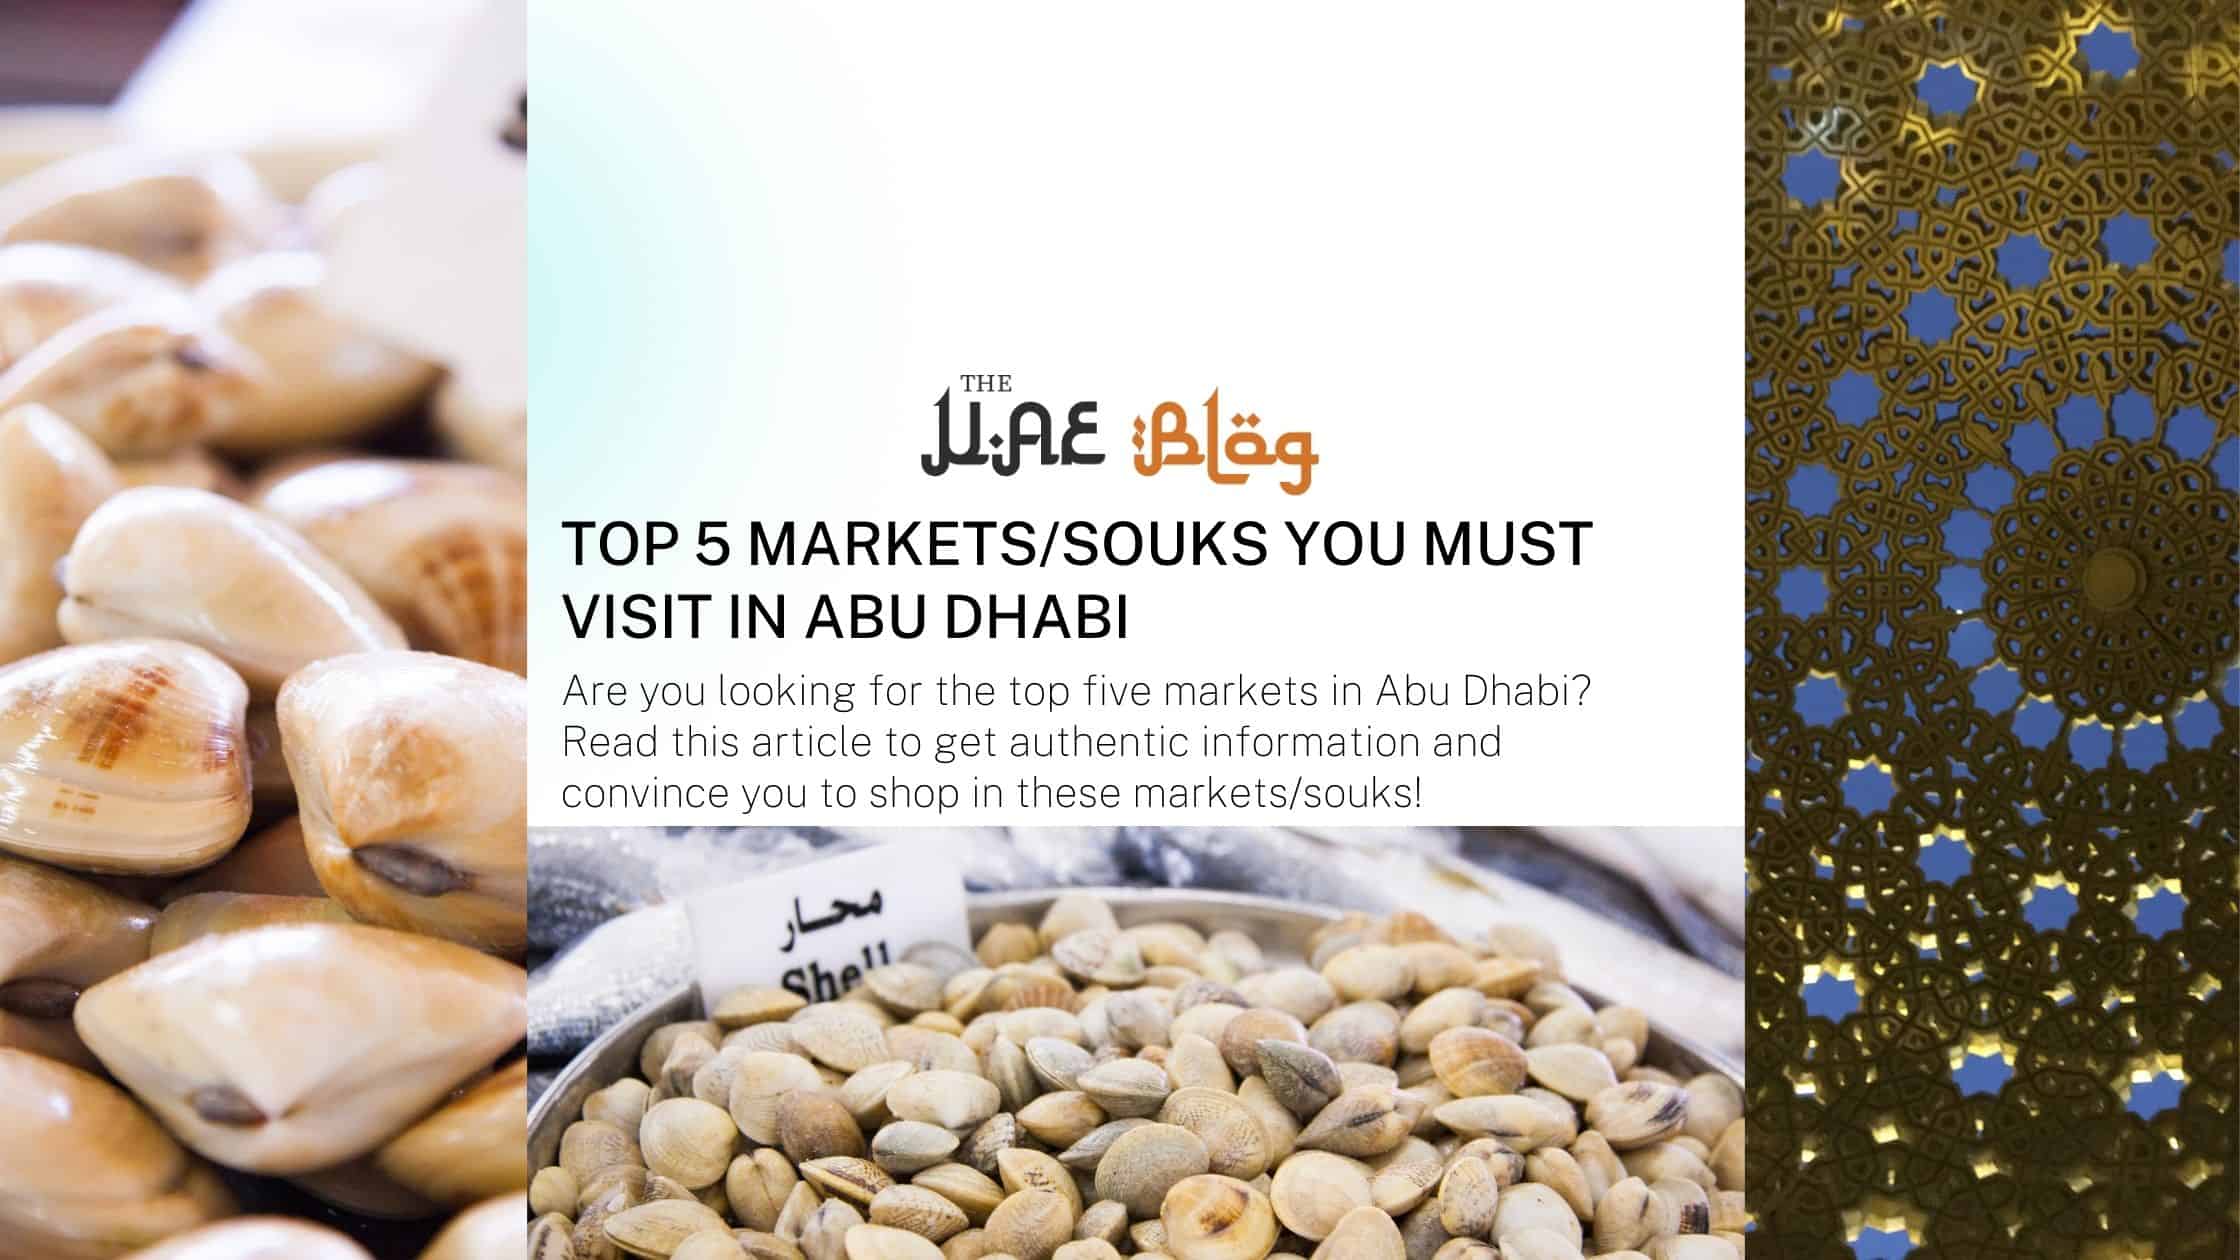 Top 5 markets/souks you must visit in Abu Dhabi